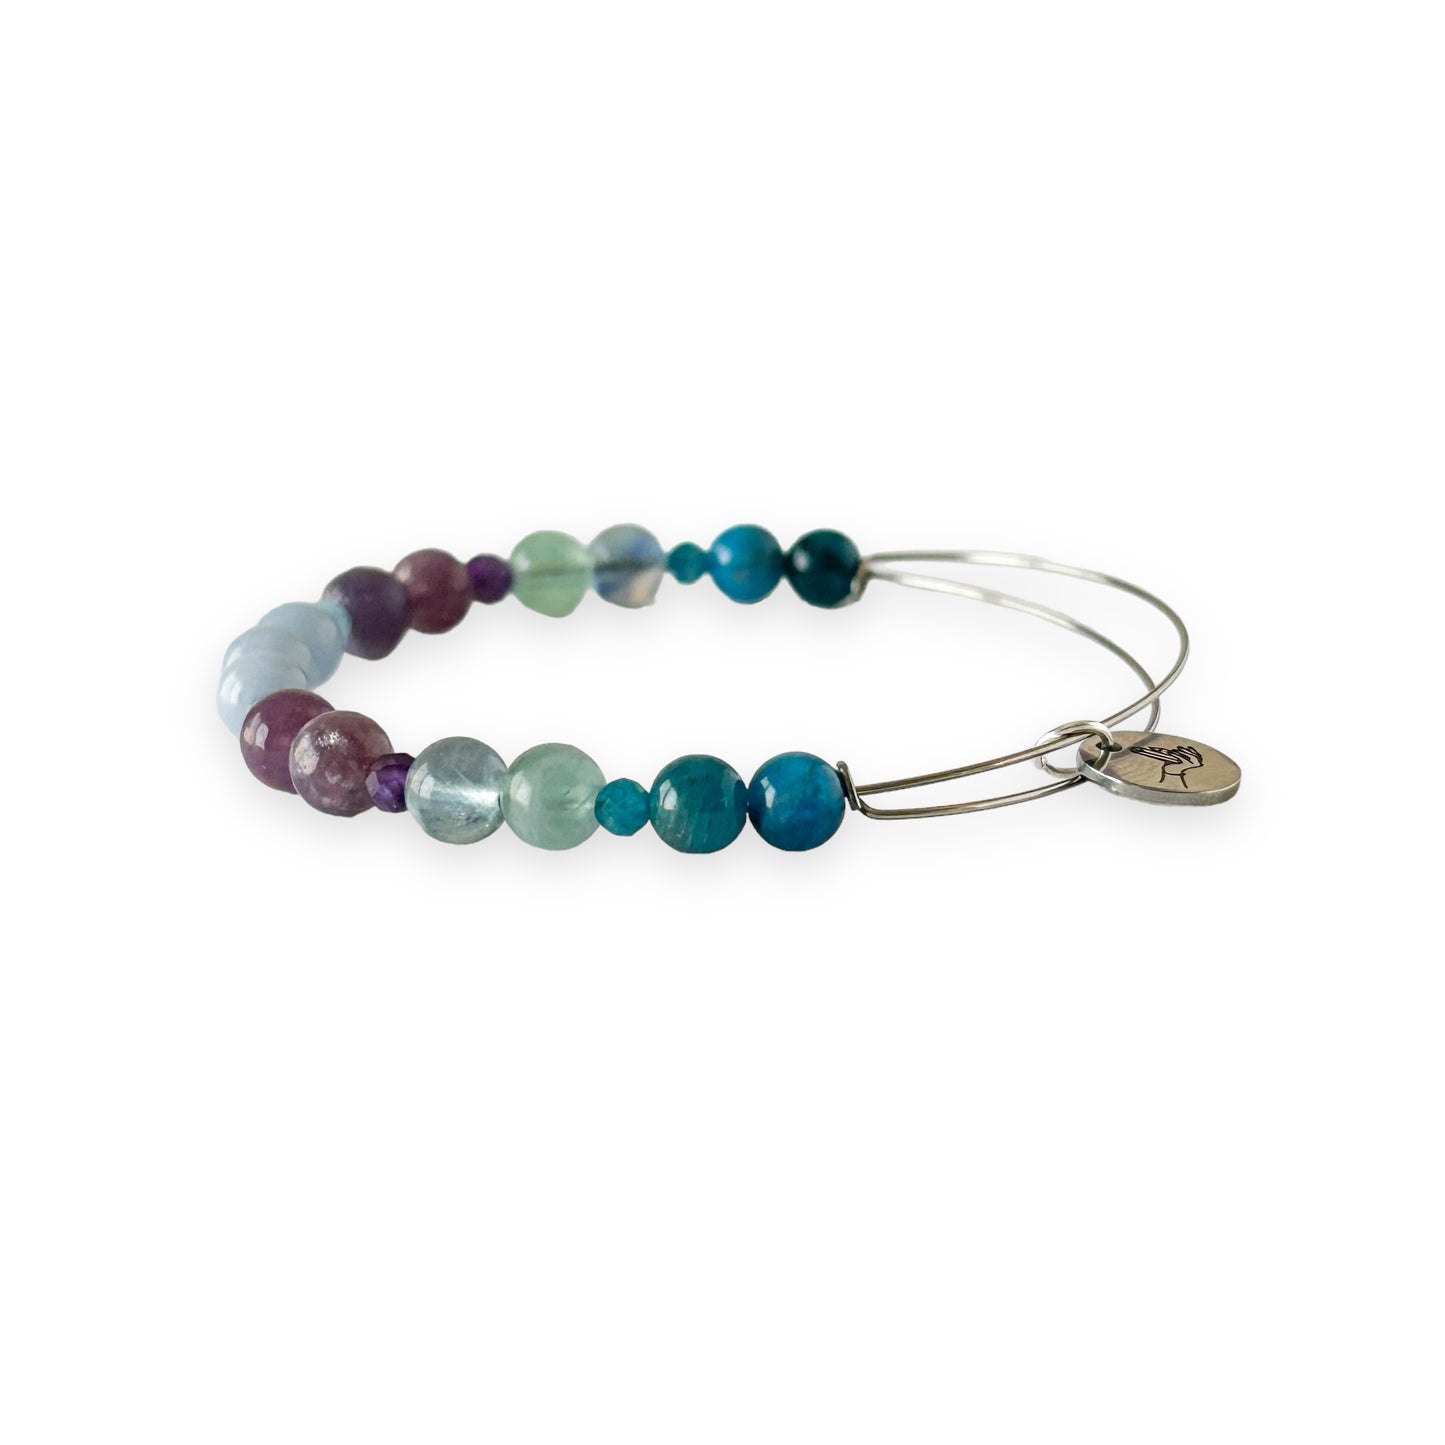 Amethyst and Fluorite bangle for calm